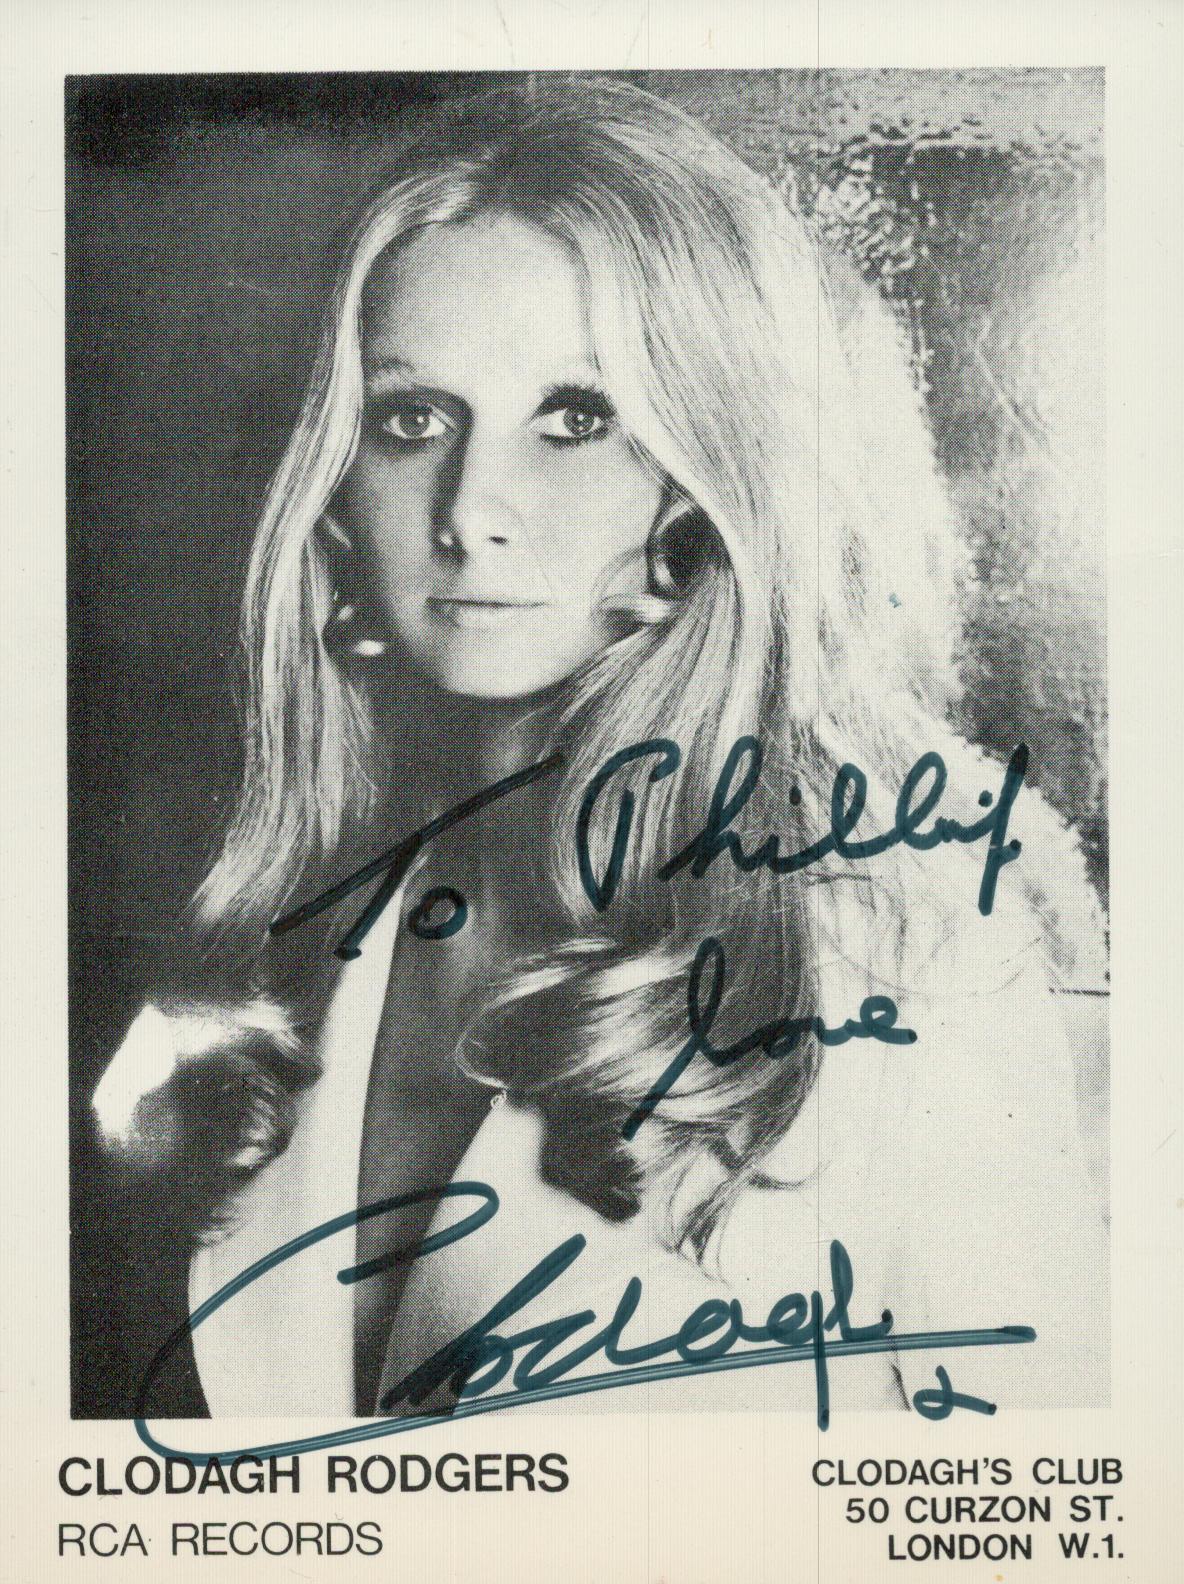 Clodagh Rodgers signed promo black & white photo 5.5x4 Inch. Dedicated. Is a retired singer from